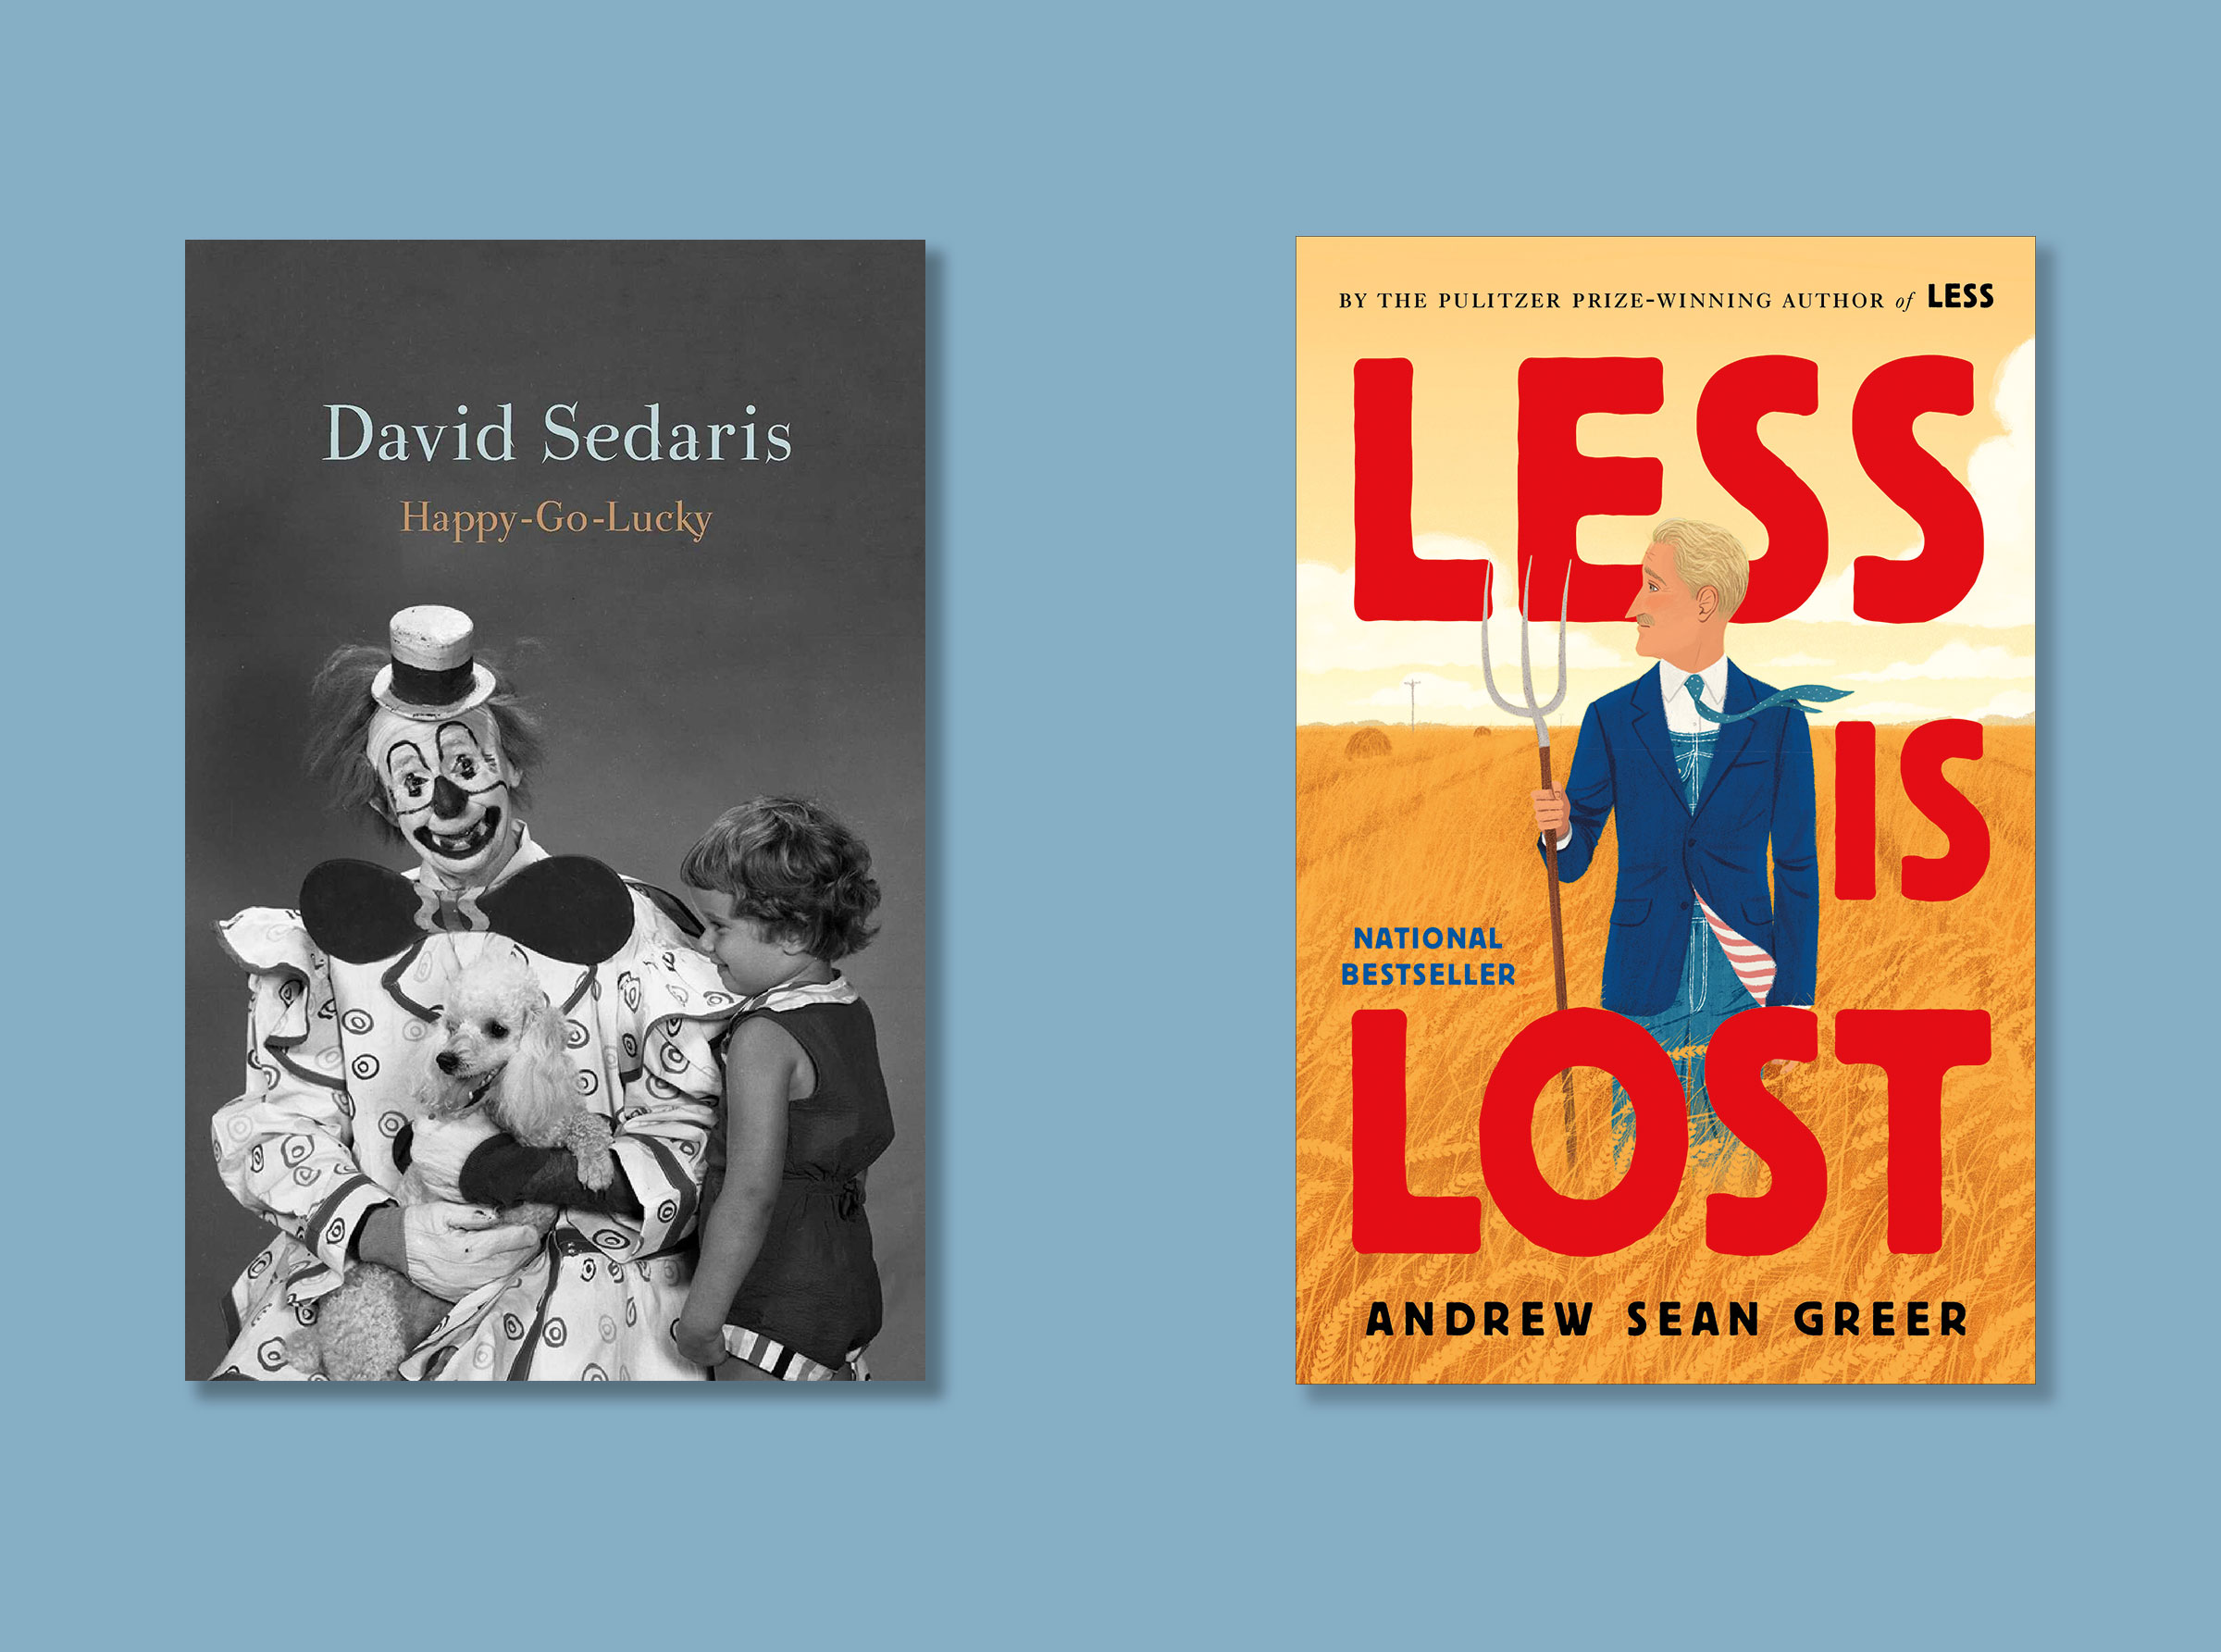 book covers of Happy-Go-Lucky by David Sedaris and Less is Lost by Andrew Sean Greer